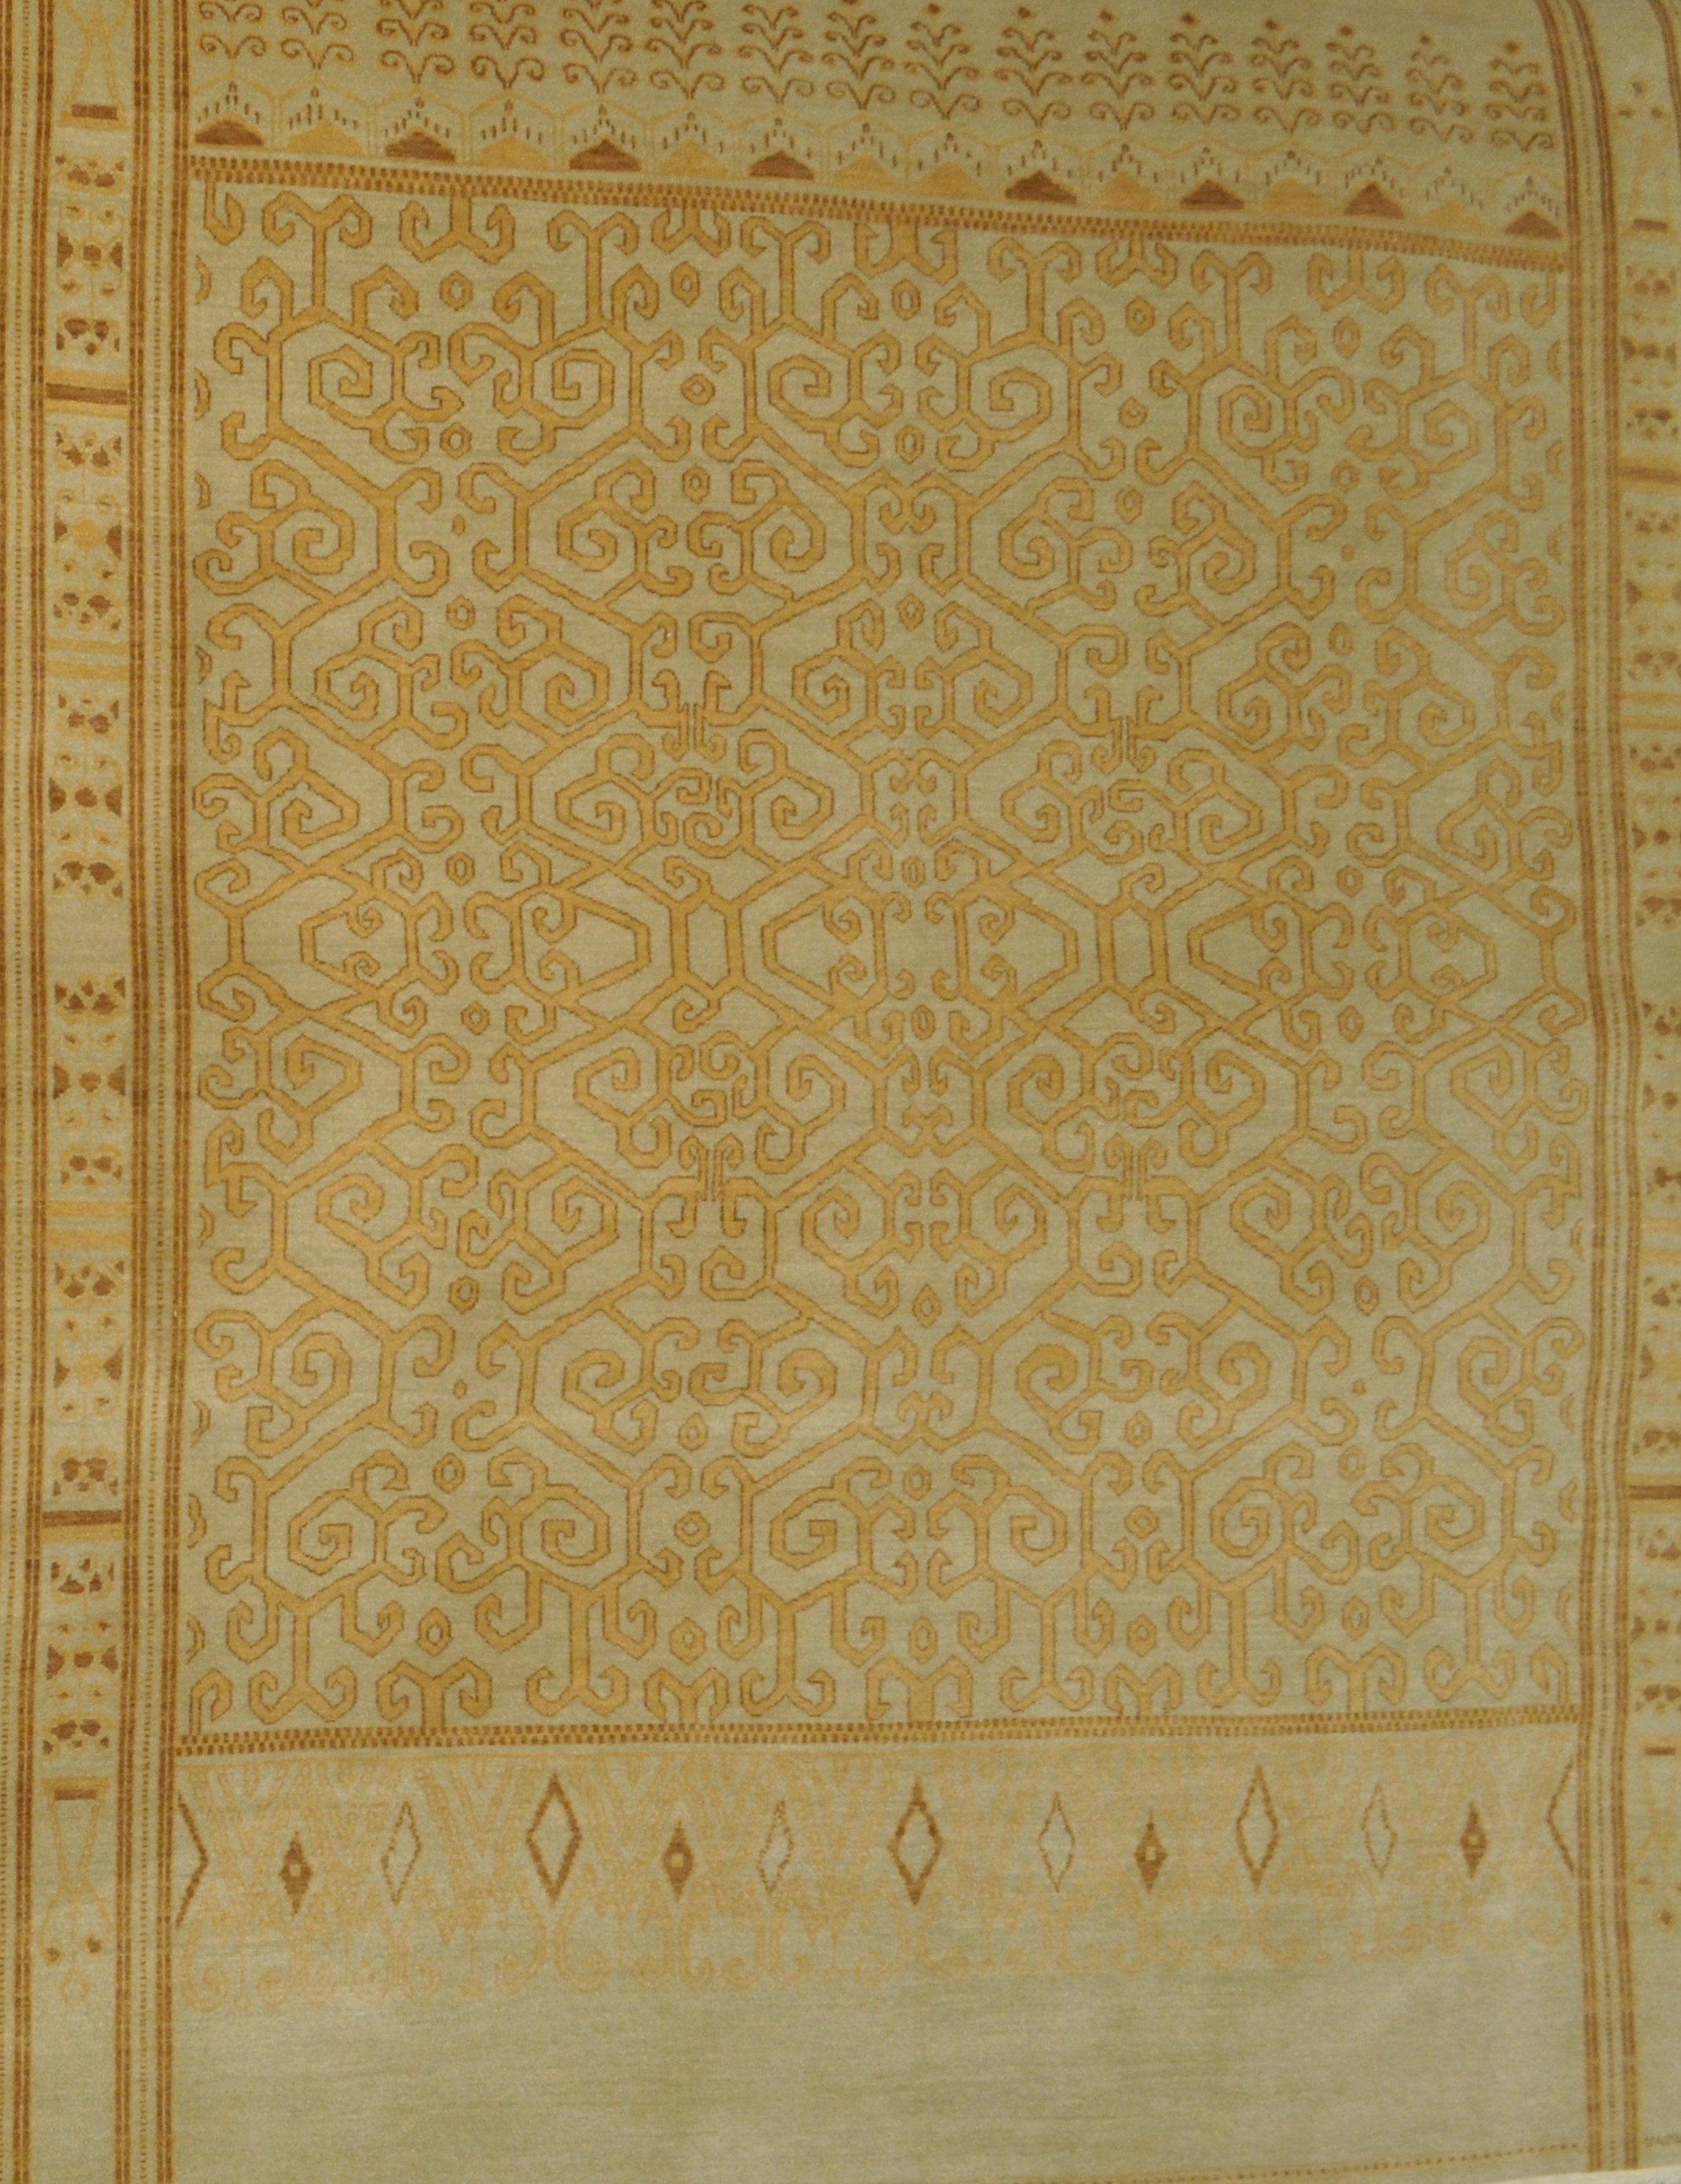 Hand knotted rug